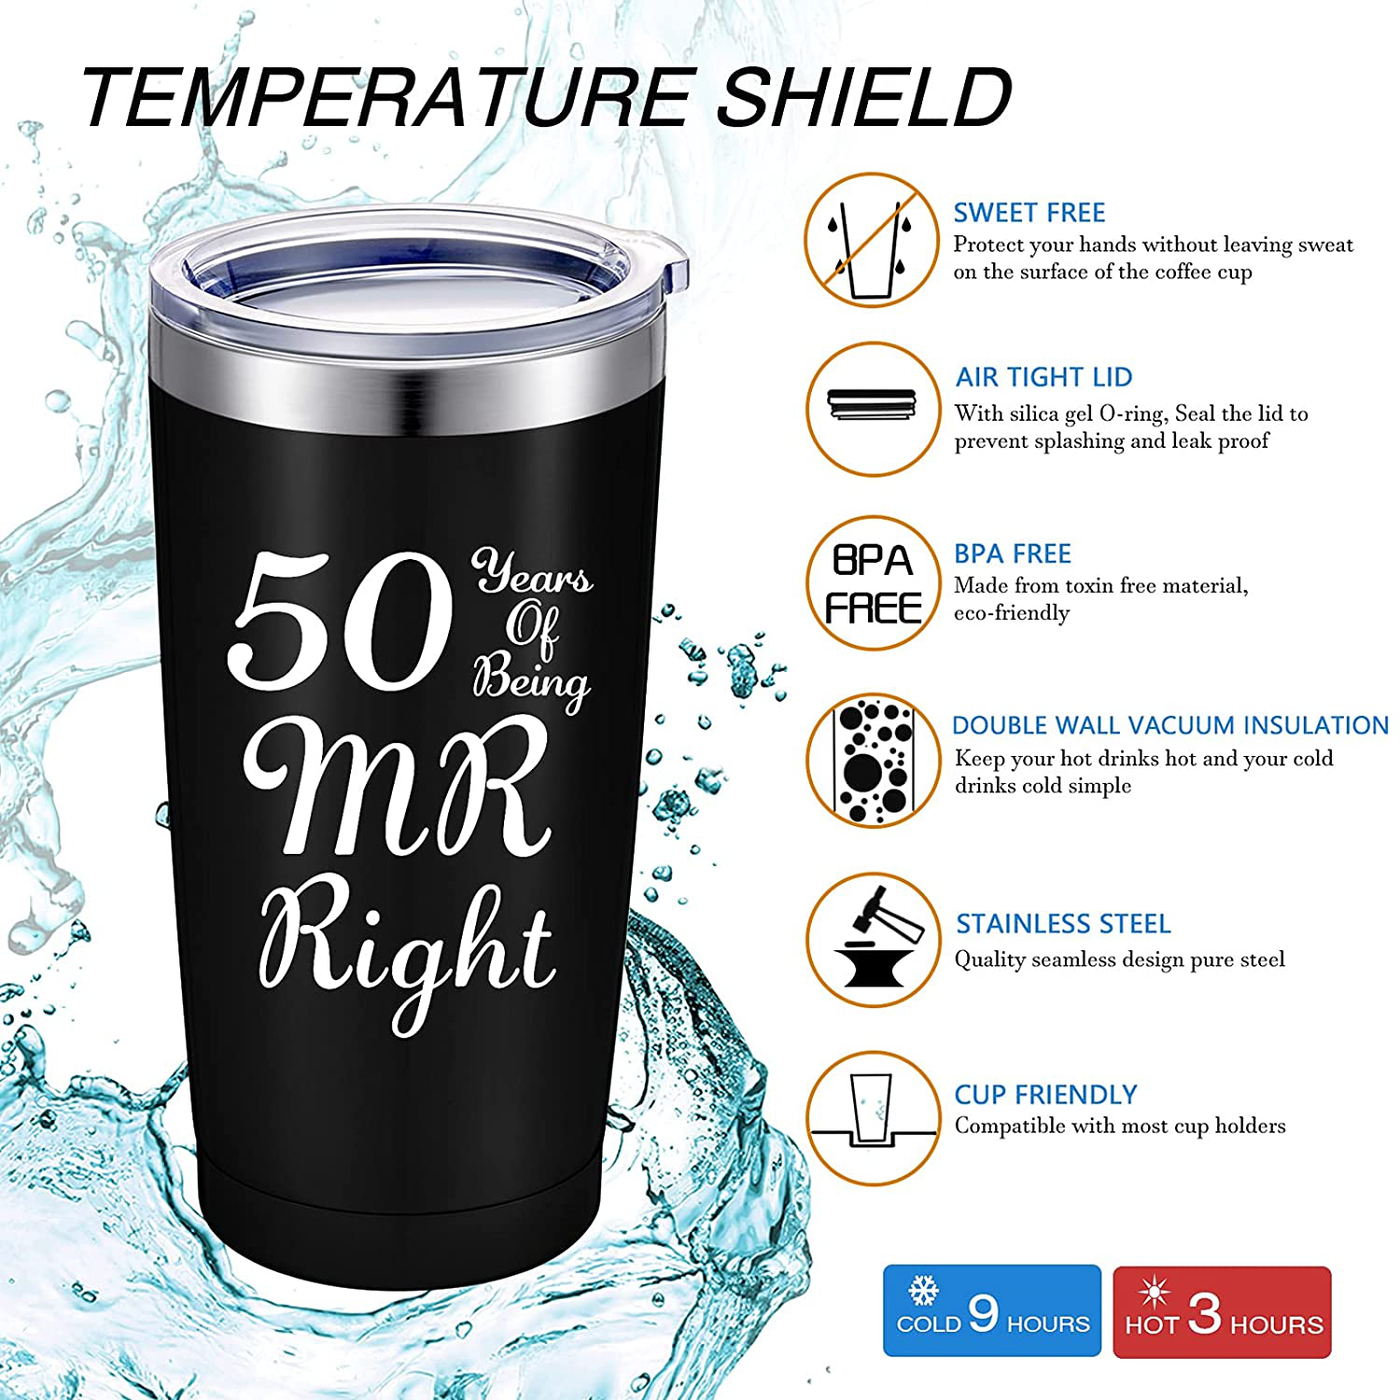 2 Pieces 50th Wedding Anniversary Coffee Mug, 50 Years of Being MR/MRS Always Right Gifts Set for Grandparents Couple Husband Wife, 20 oz Mug Tumbler with Lids and Gift Box (Black, White)